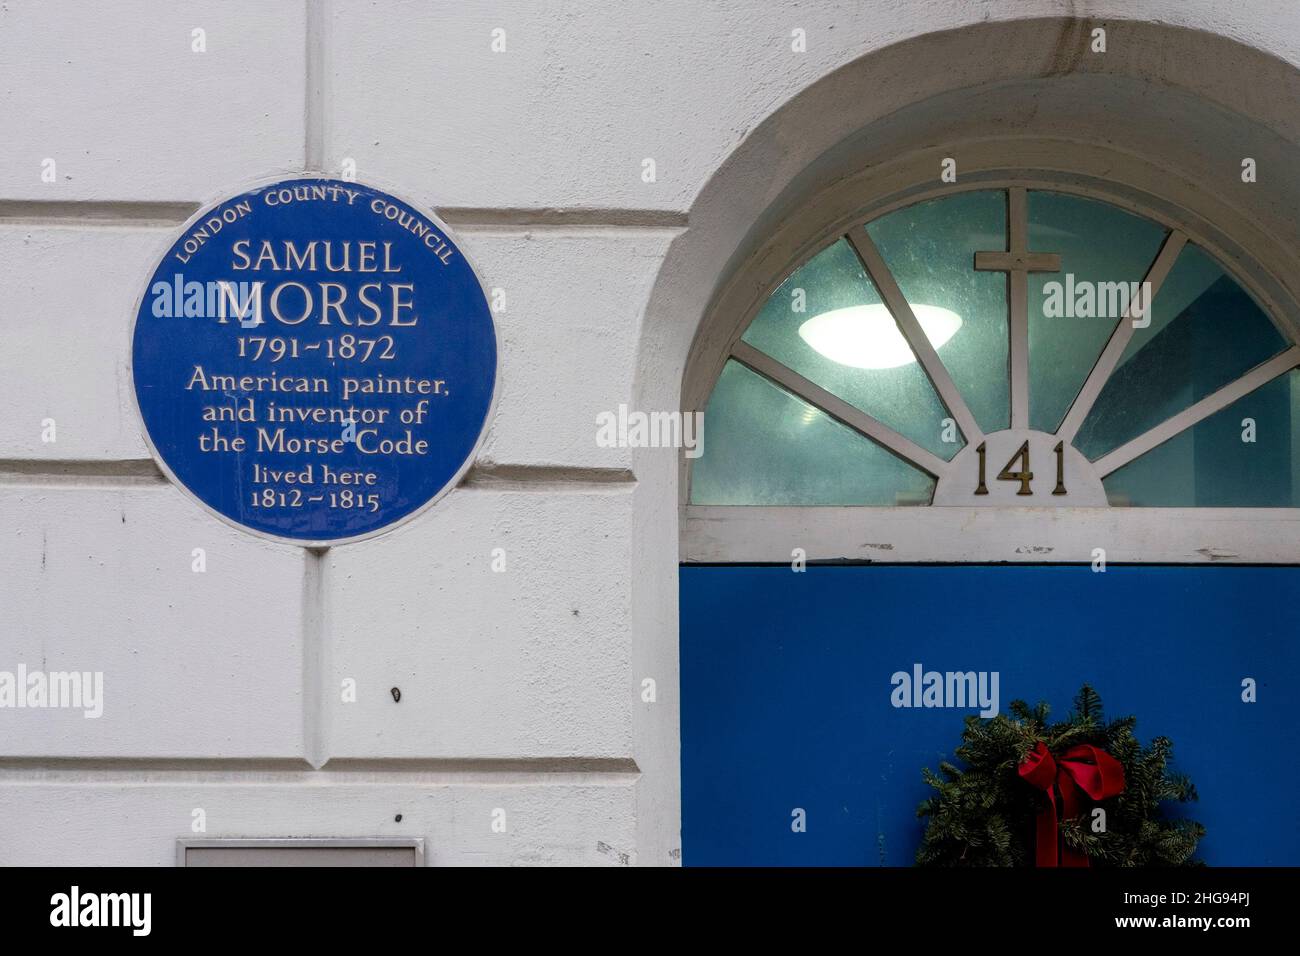 Commemorative plaque at 141 Cleveland Street, London to Samuel Morse, inventor of the Morse Code who lived in the house between 1812-1815. London, UK. Stock Photo